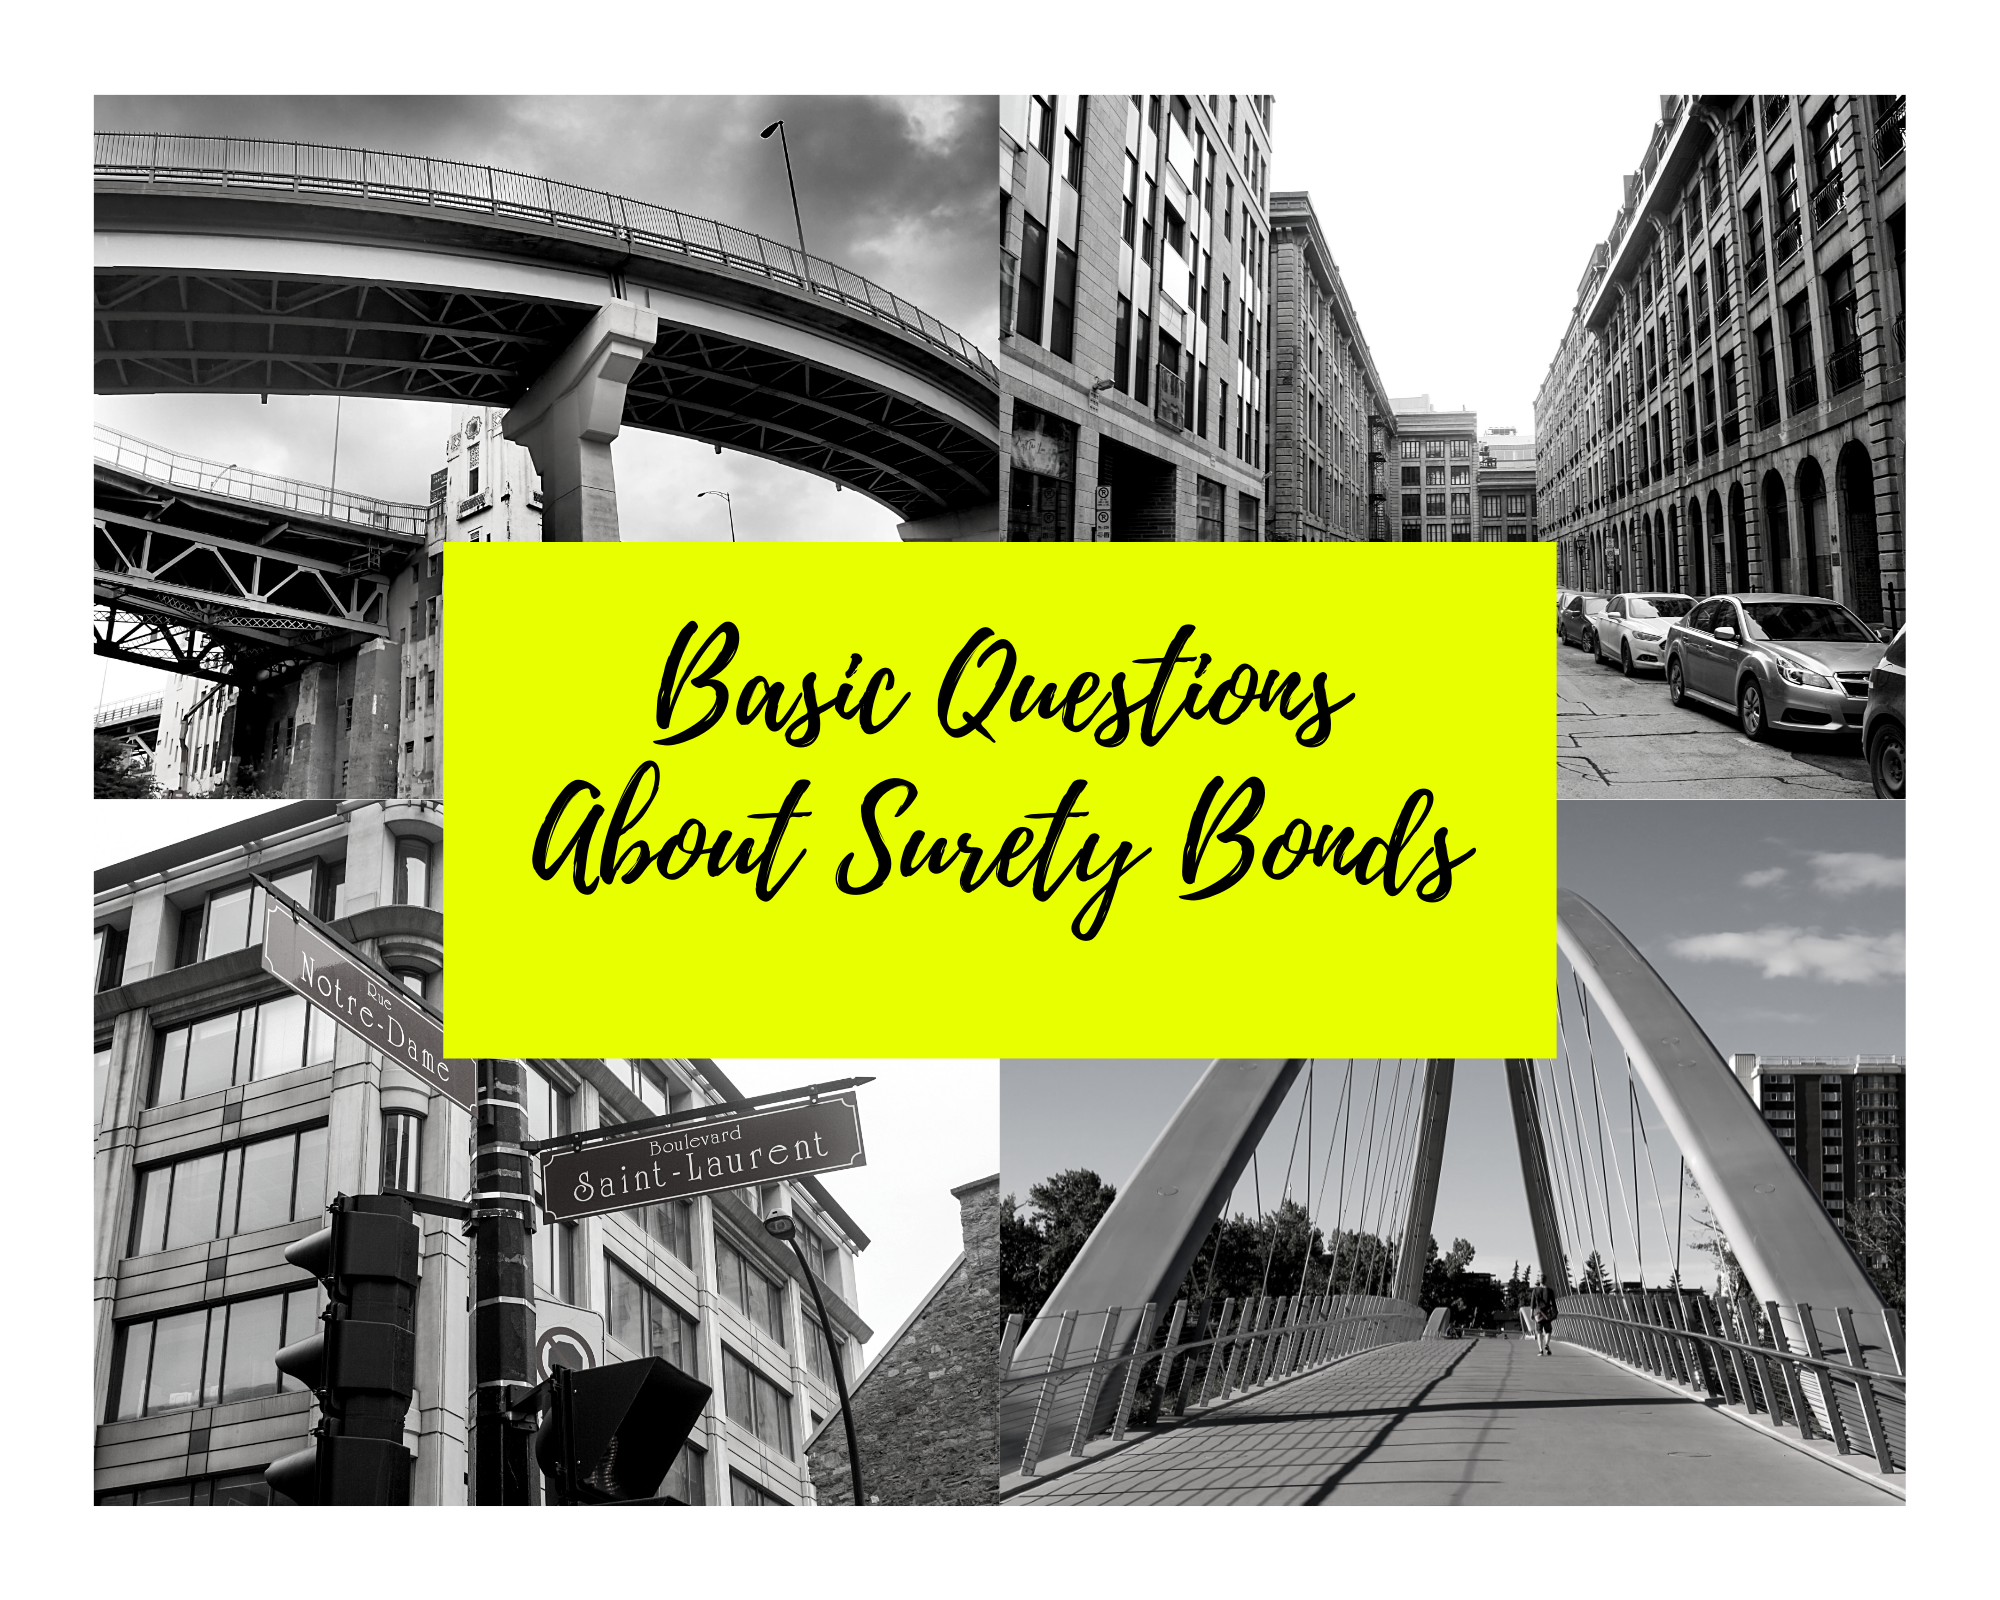 surety bonds - what is the definition of a surety bond - places in canada in black and white